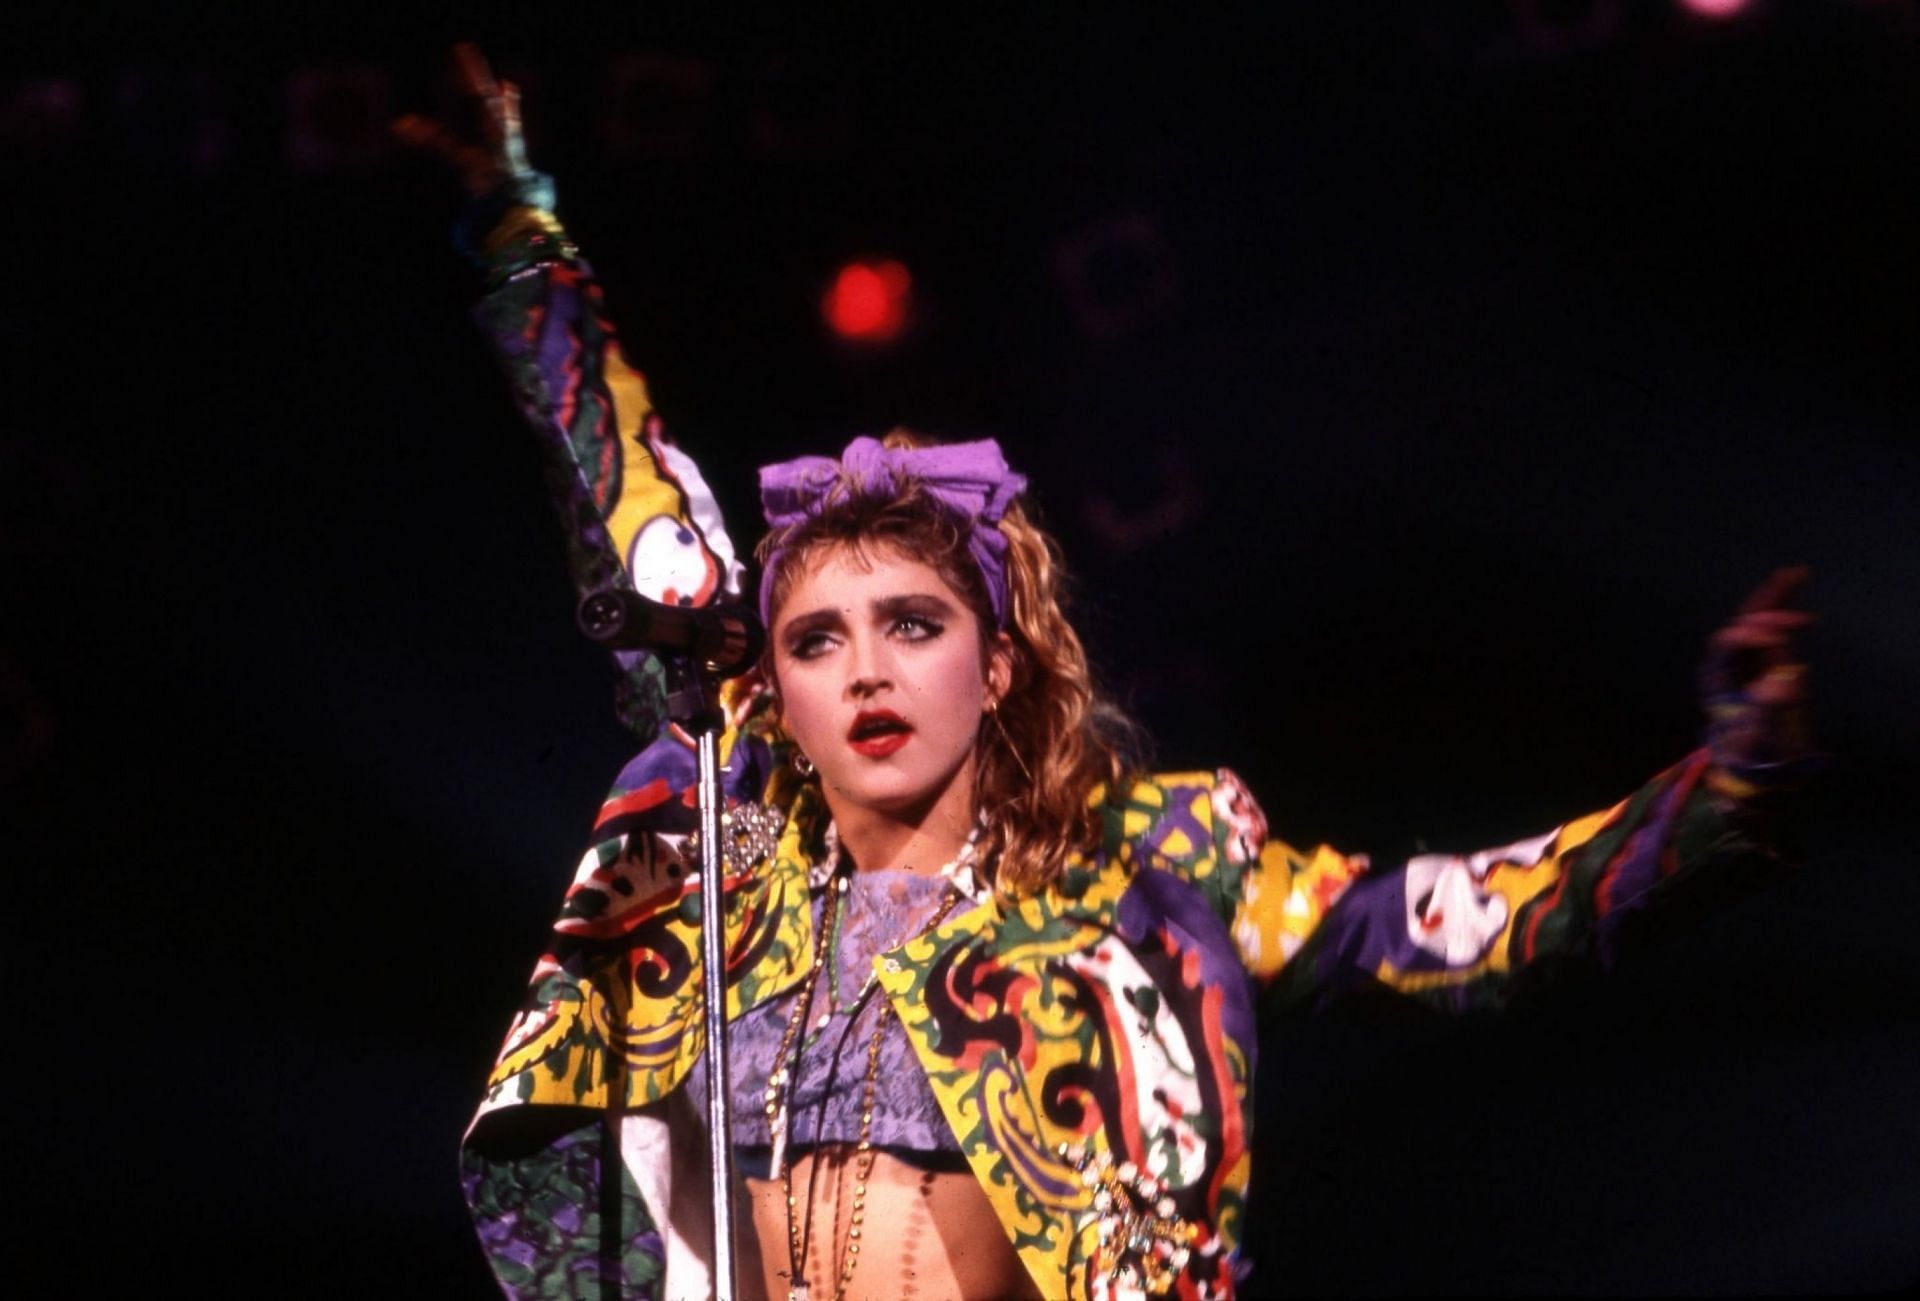  Madonna at Cobo Arena in Detroit, Michigan on on May 25, 1985 (Image via Getty Images) 